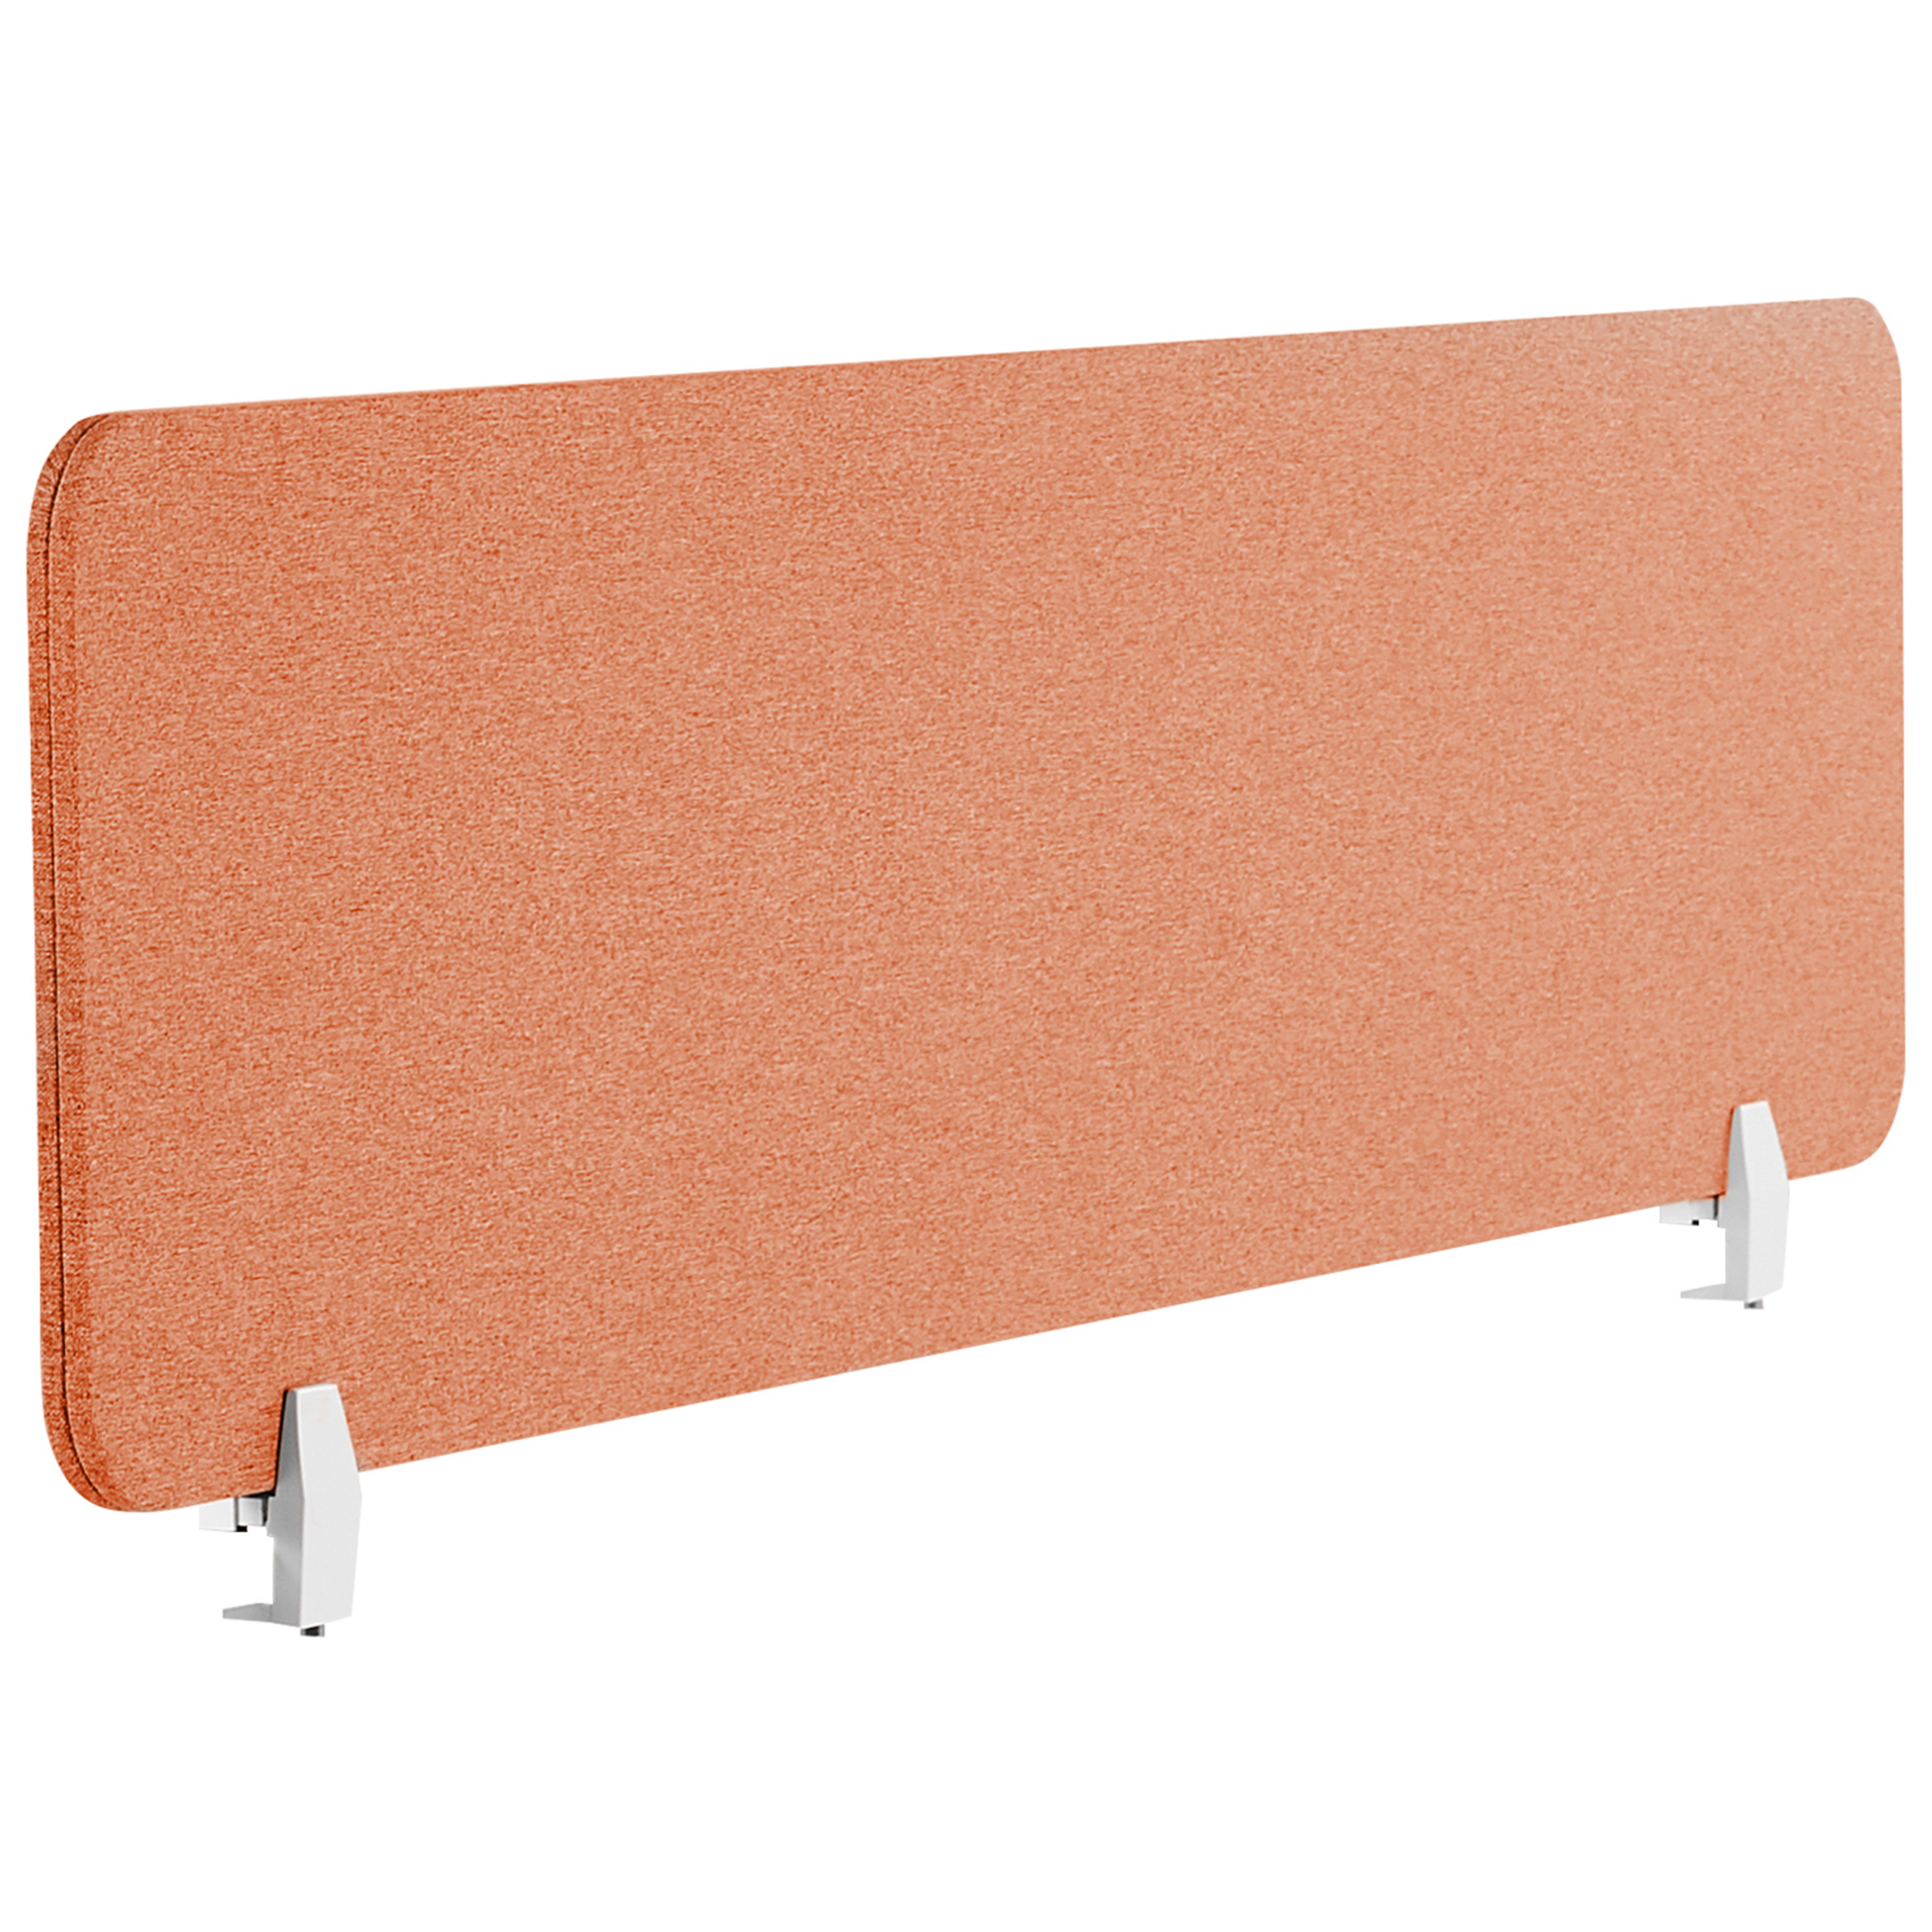 Beliani Desk Screen Light Red PET Board Fabric Cover 180 x 40 cm Acoustic Screen Modular Mounting Clamps Home Office Material:Polyester Size:2x40x180